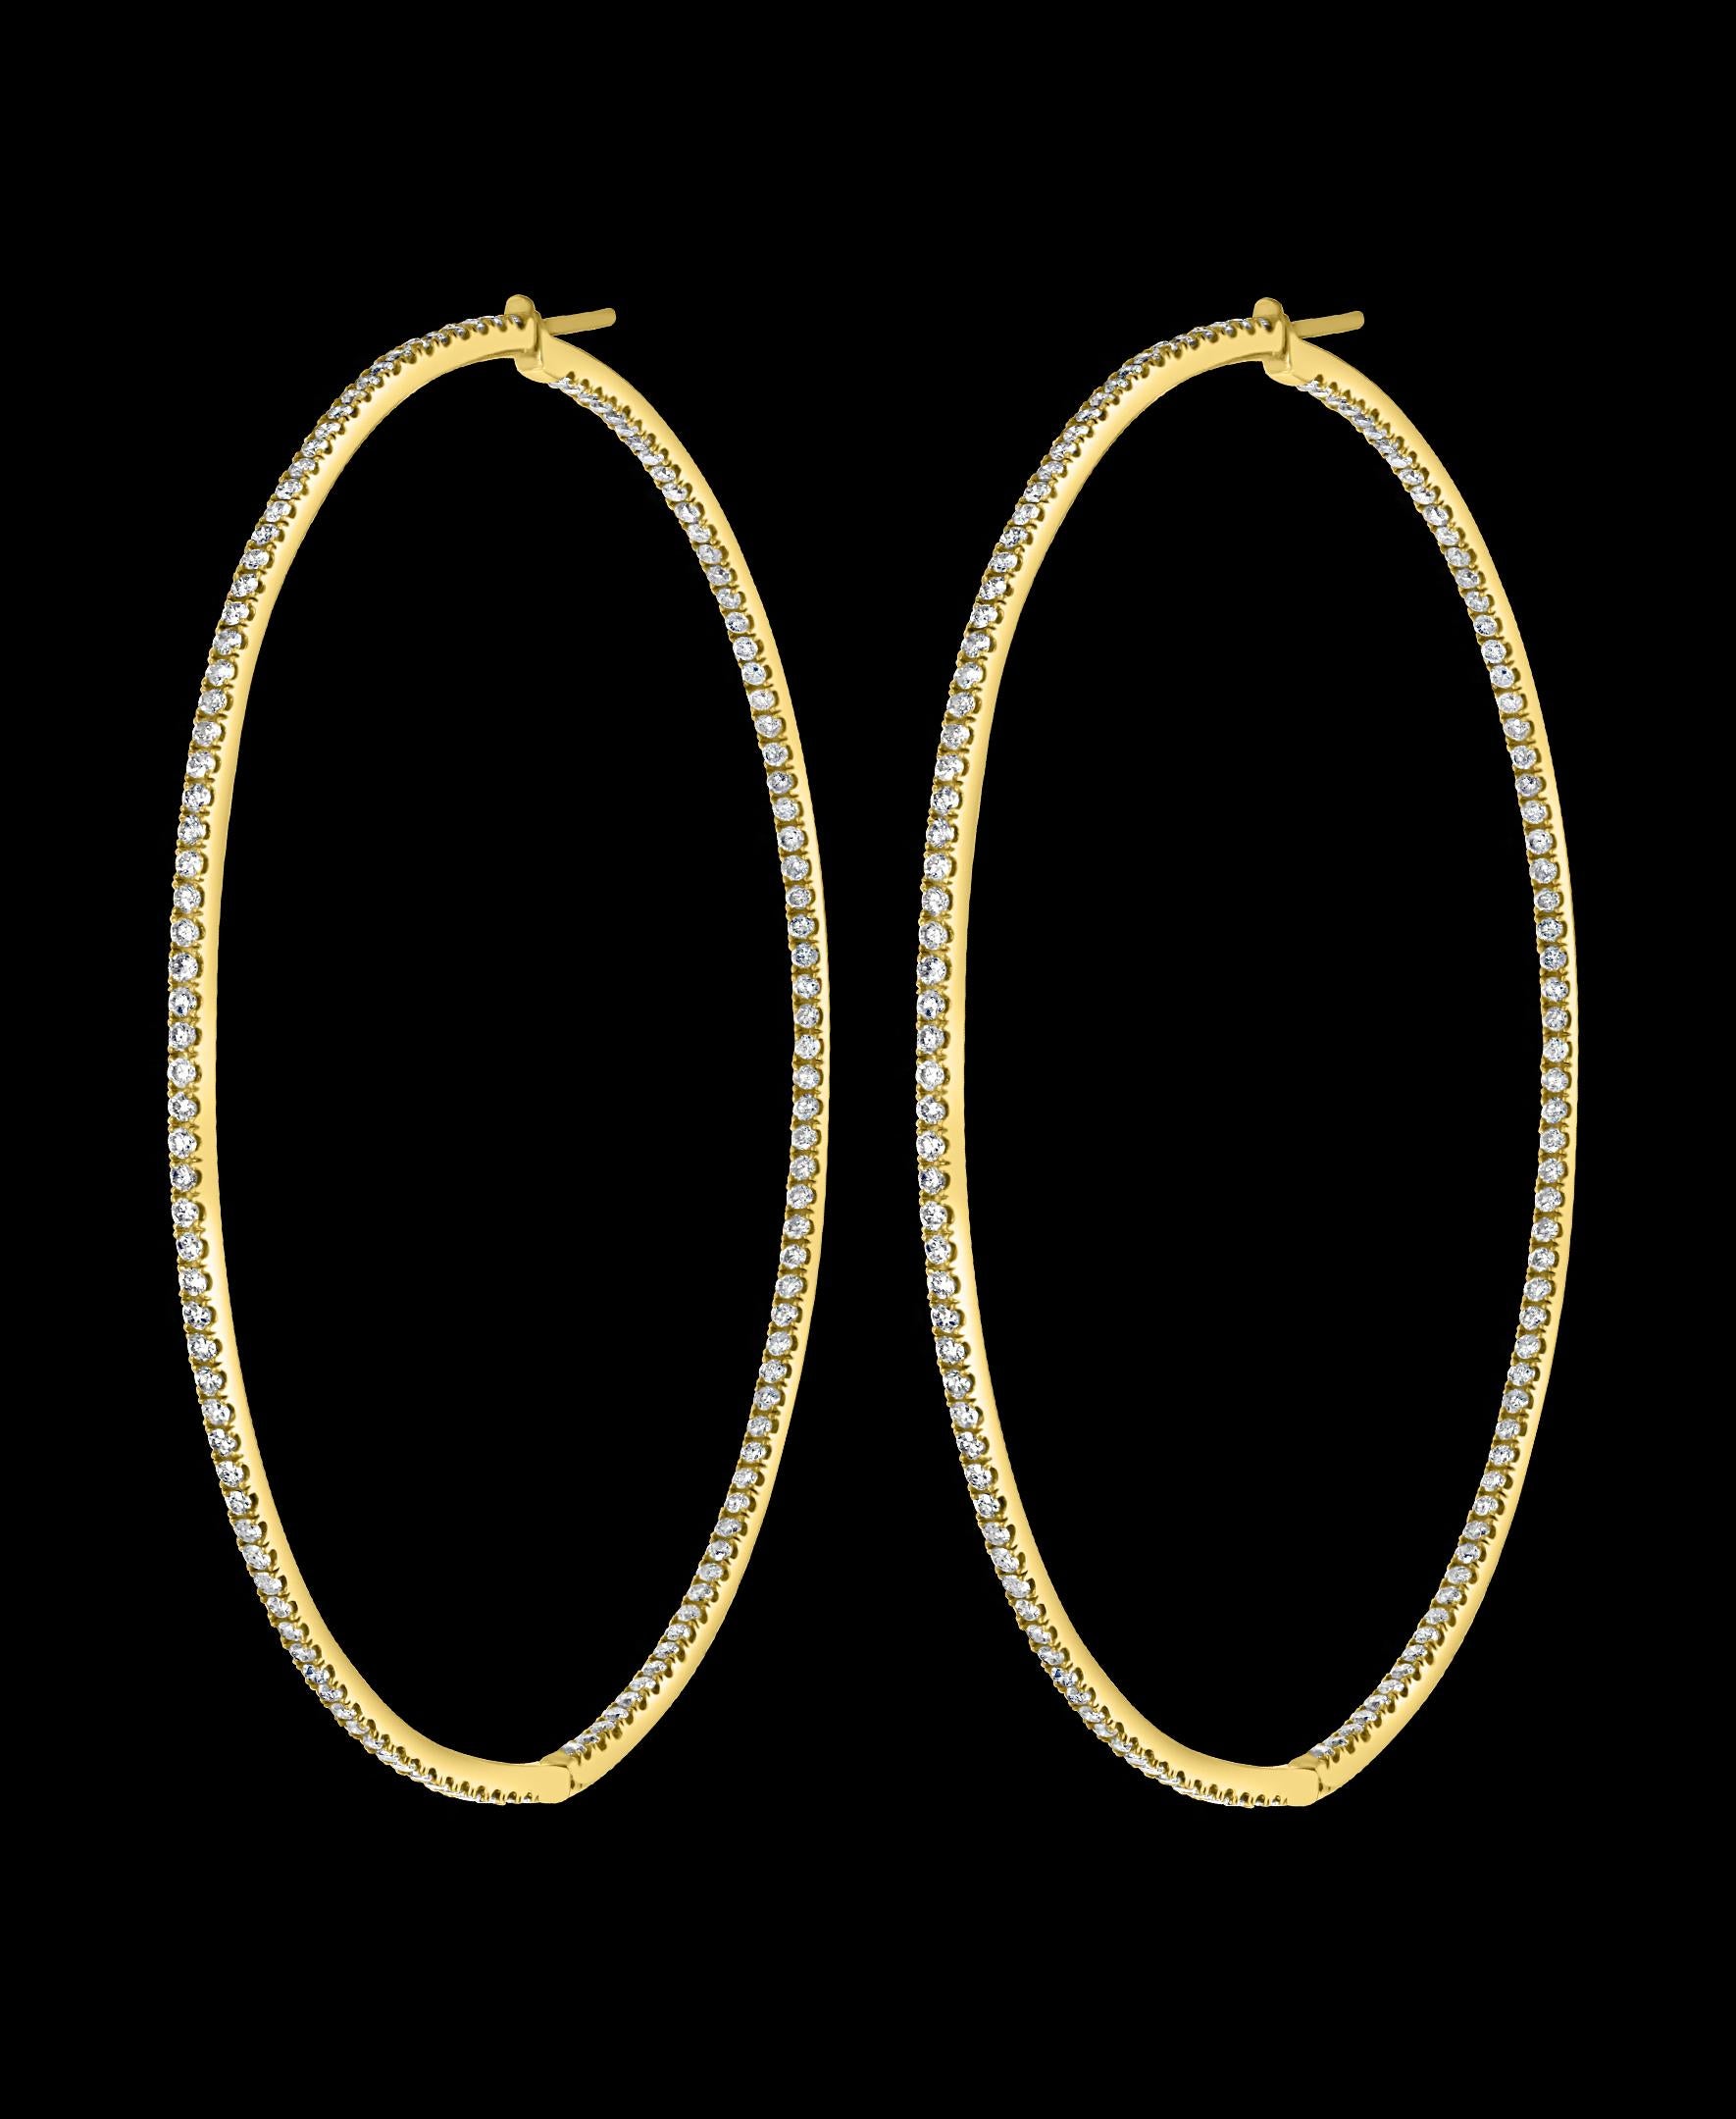 4.5 Carat Very Large Diamond Hoop Gala Cocktail Earrings in 14 Karat Yellow Gold
A fabulous pair of Hoop earrings with an enormous amount of look and sparkle!
These exquisite pair of earrings features round Brilliant cut diamonds   which are set